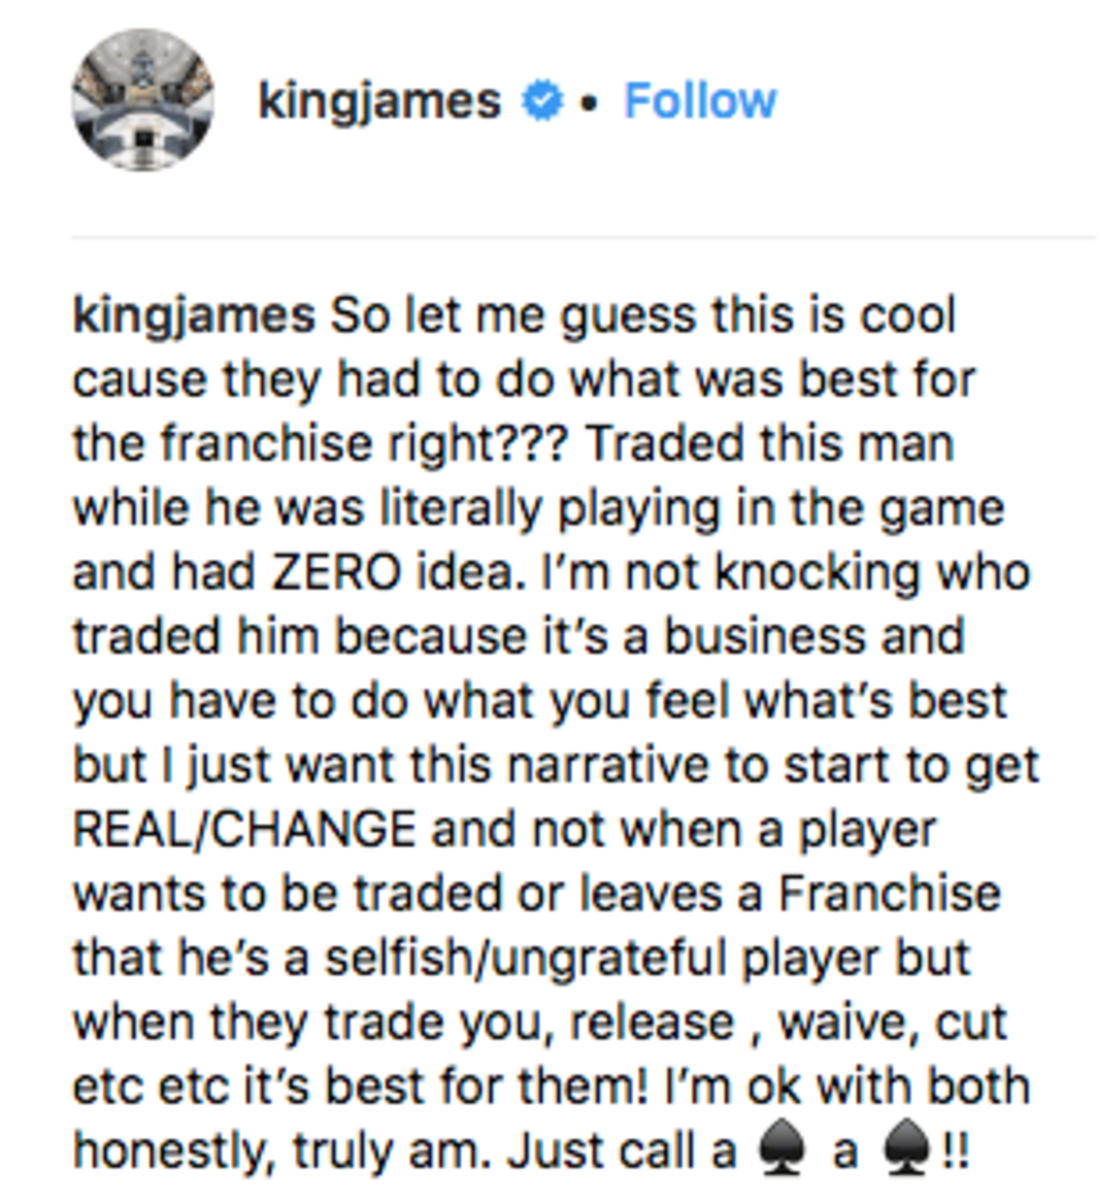 LeBron's comment on Barnes being traded during the game